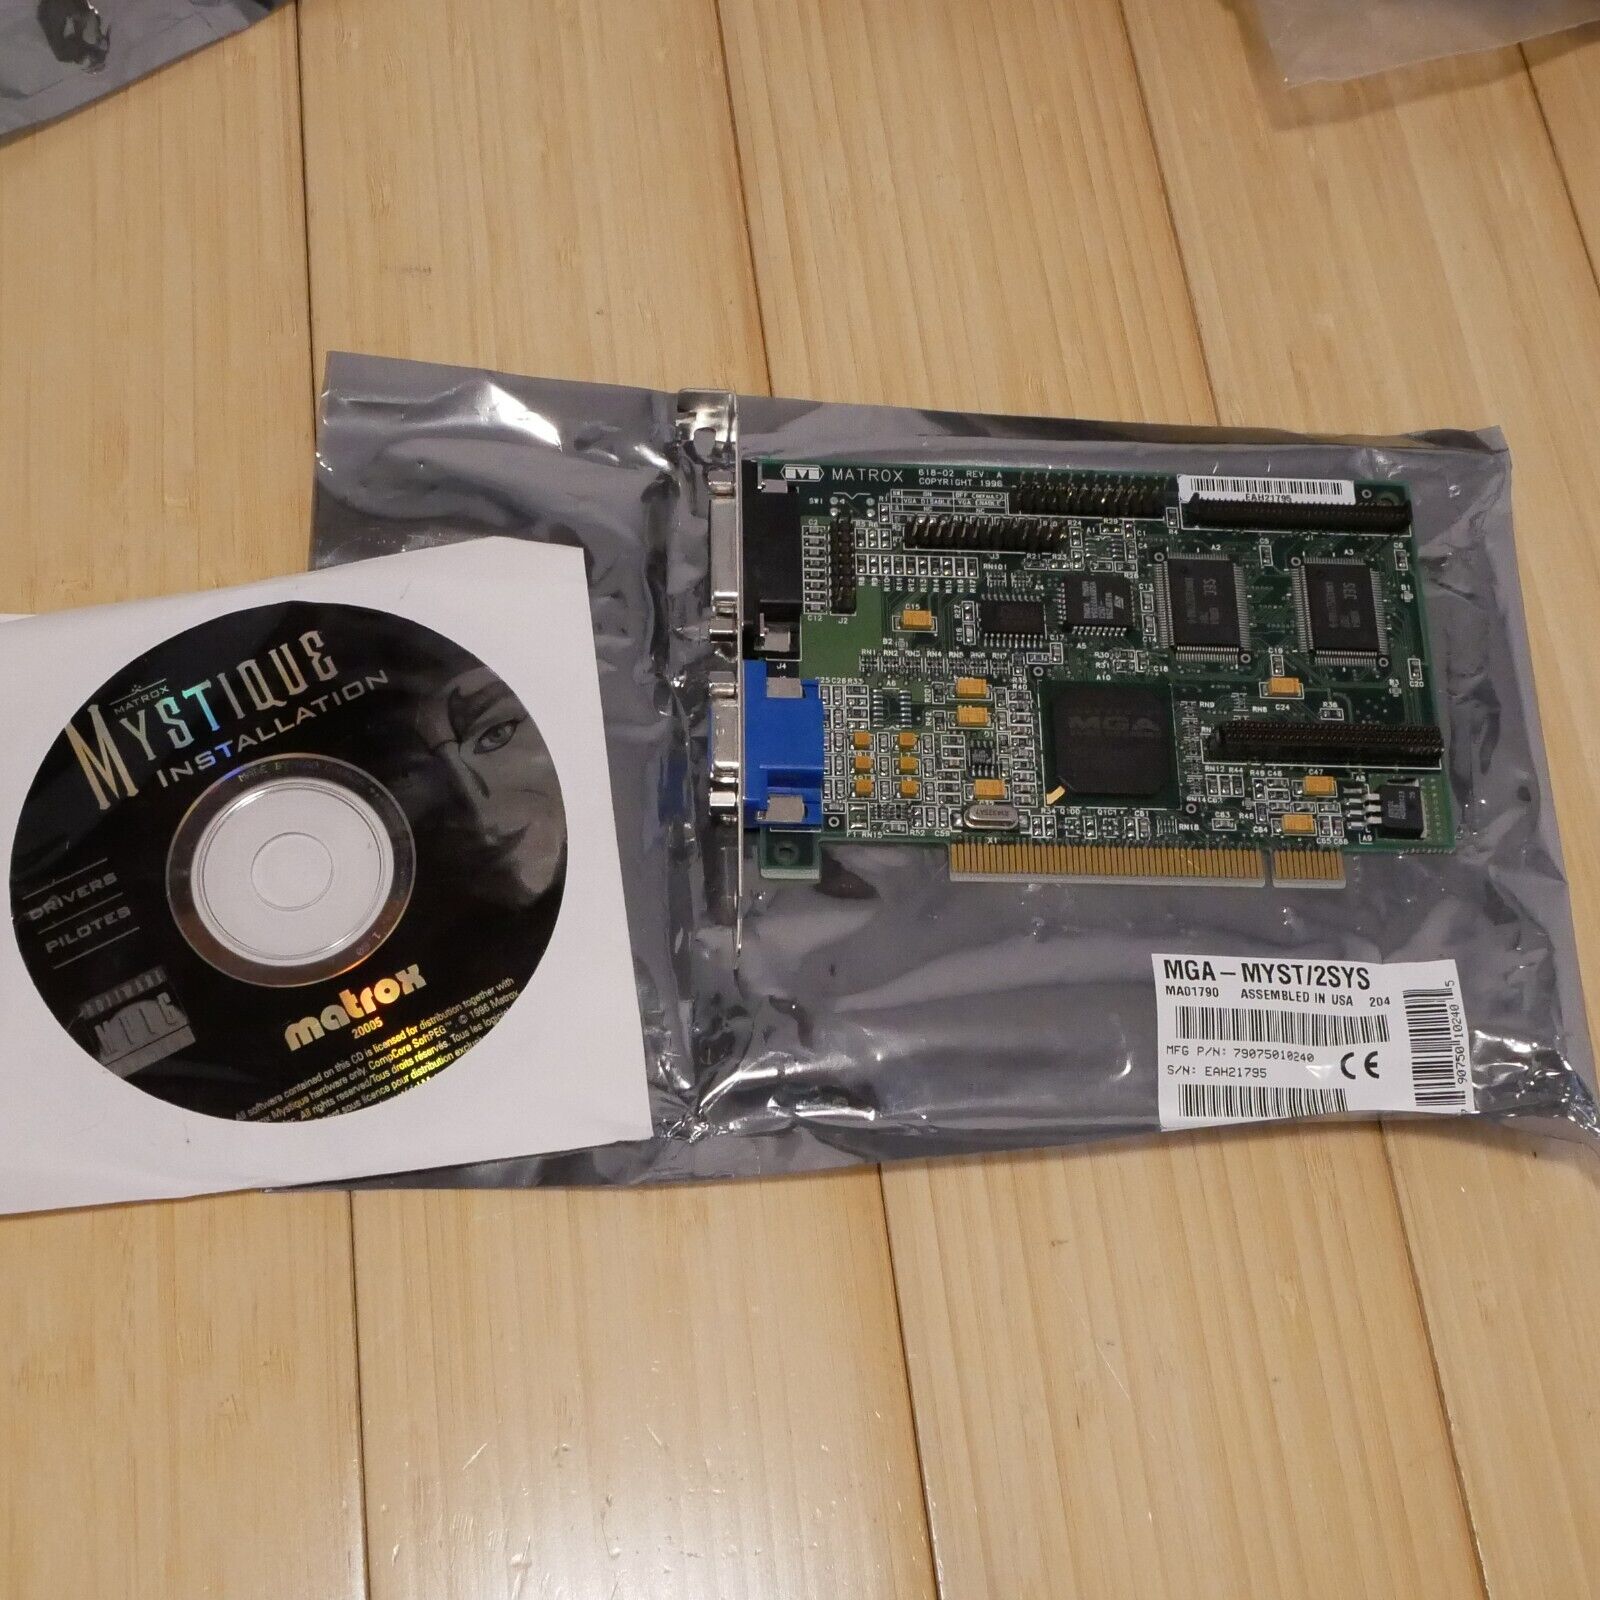 Matrox Mystique 2MB PCI VGA Video Card MGA-MYST-2SYS With Driver CD - Tested 01